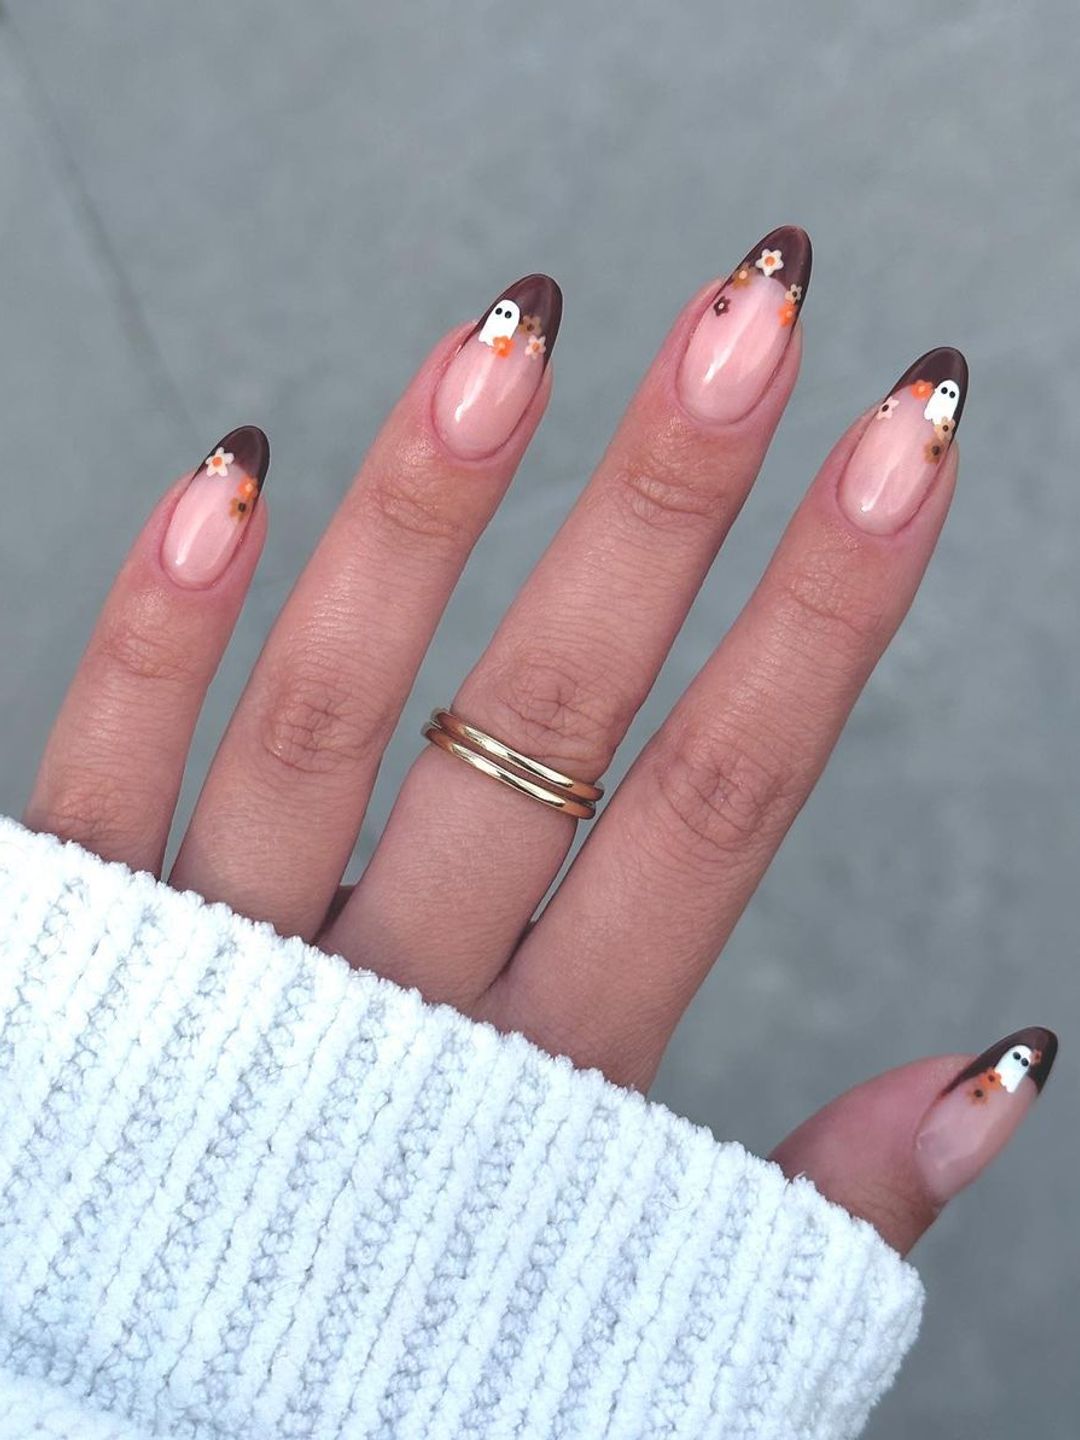 Nails with brown tips and ghost nail art 